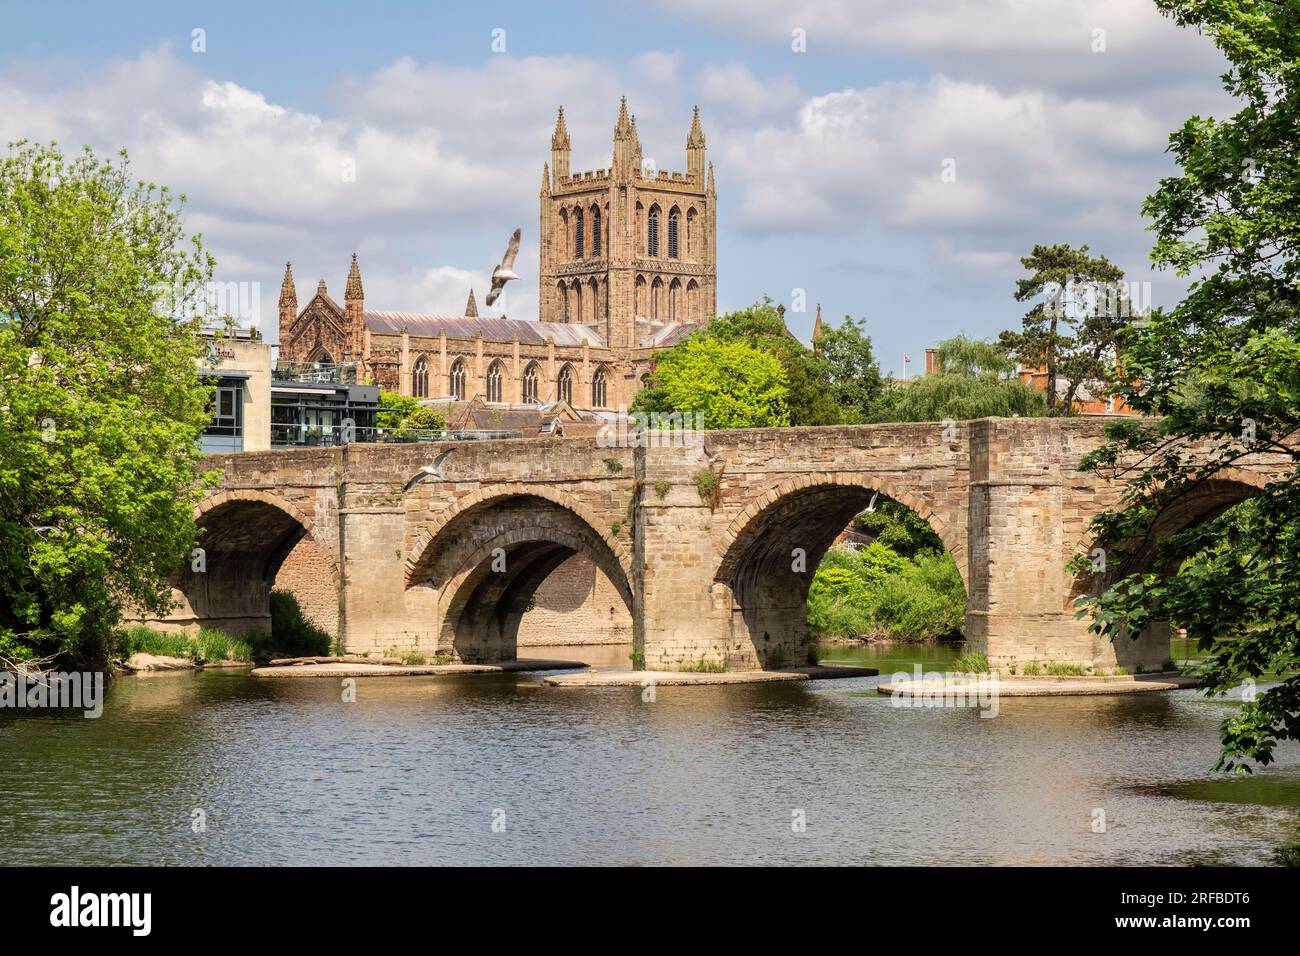 View along the Rver Wye to the old St Martin's bridge and Cathedral of Saint Mary the Virgin in Hereford, Herefordshire, England, UK, Britain Stock Photo